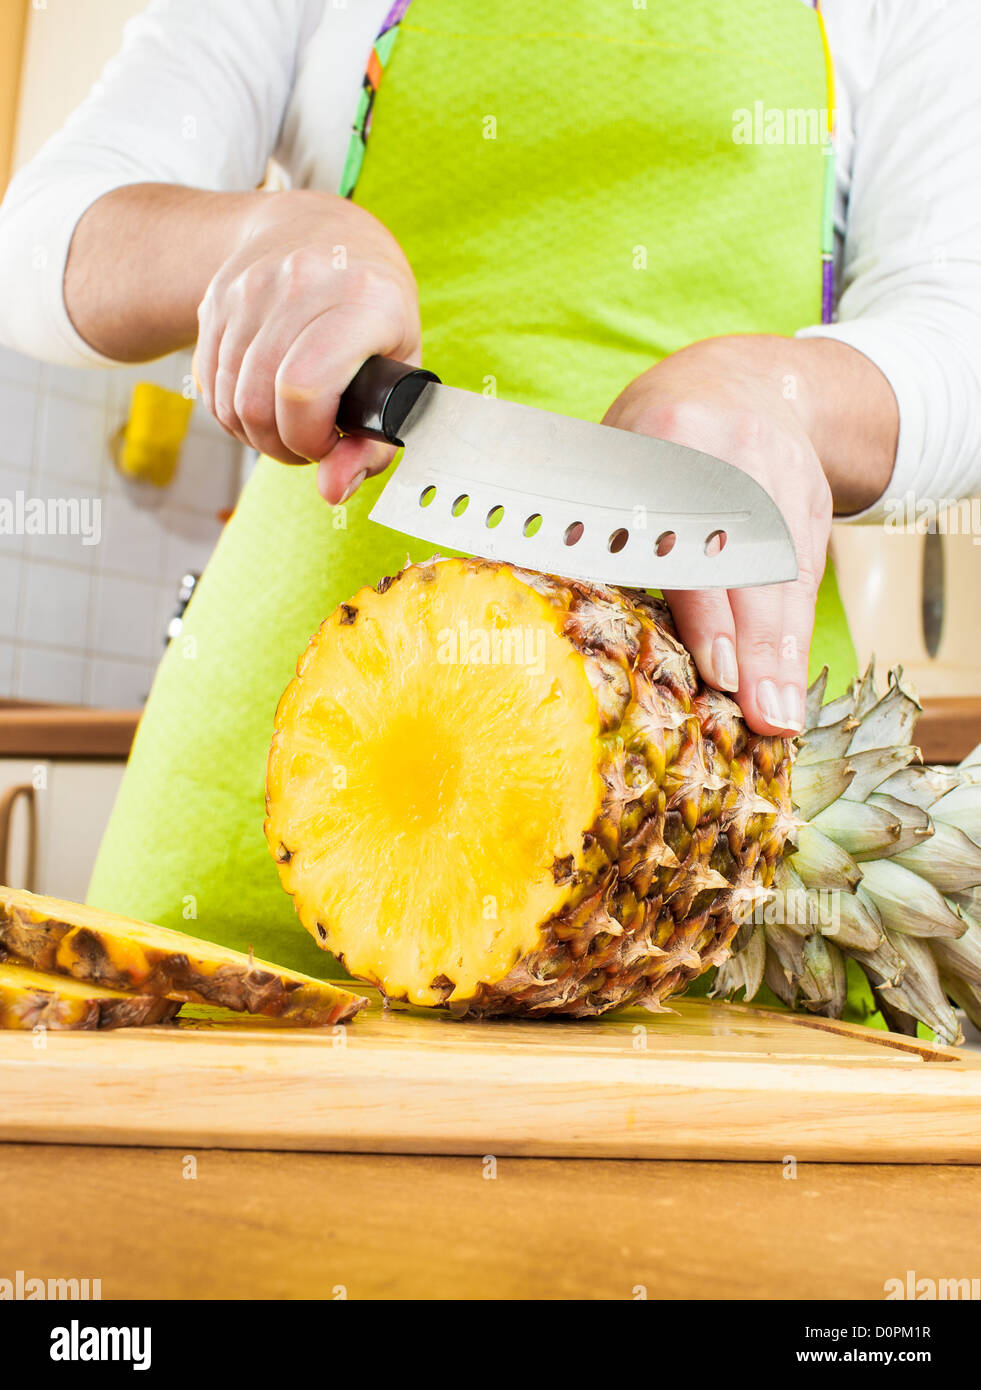 Woman's hands cutting pineapple Stock Photo